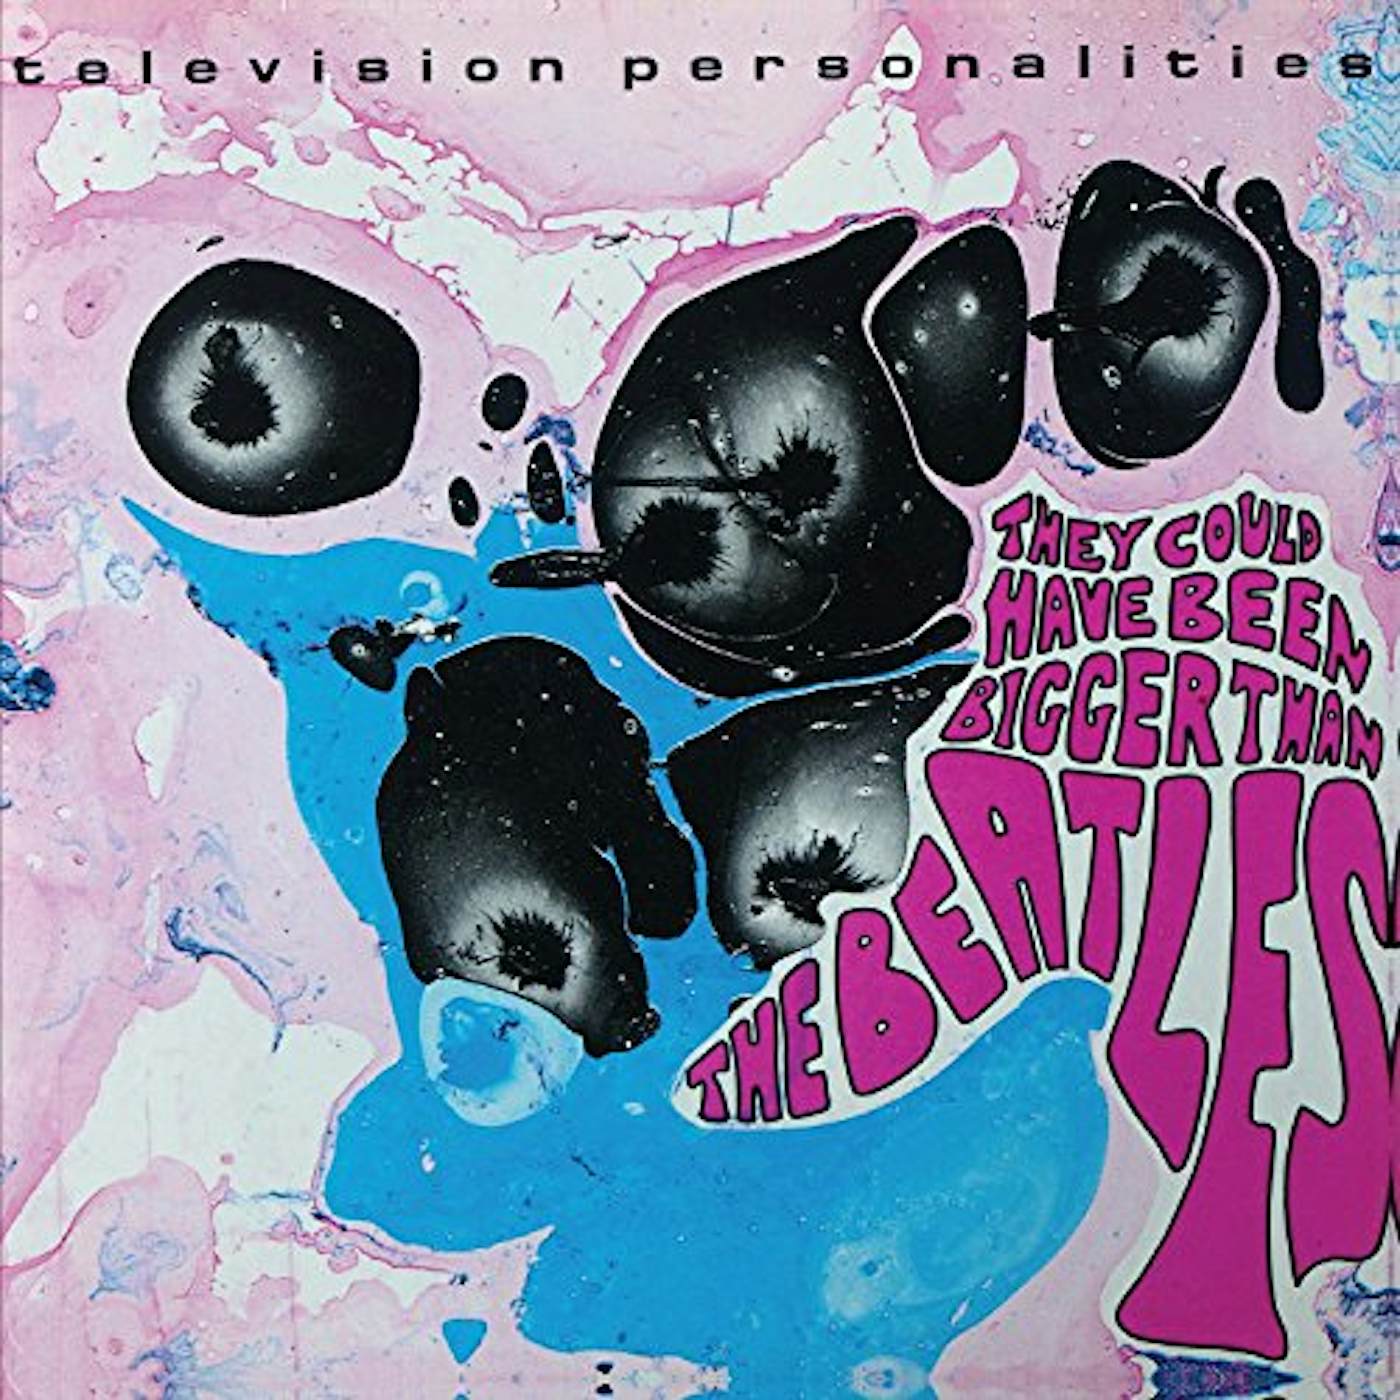 Television Personalities THEY COUD HAVE BEEN BIGGER THAN THE BEATLES CD